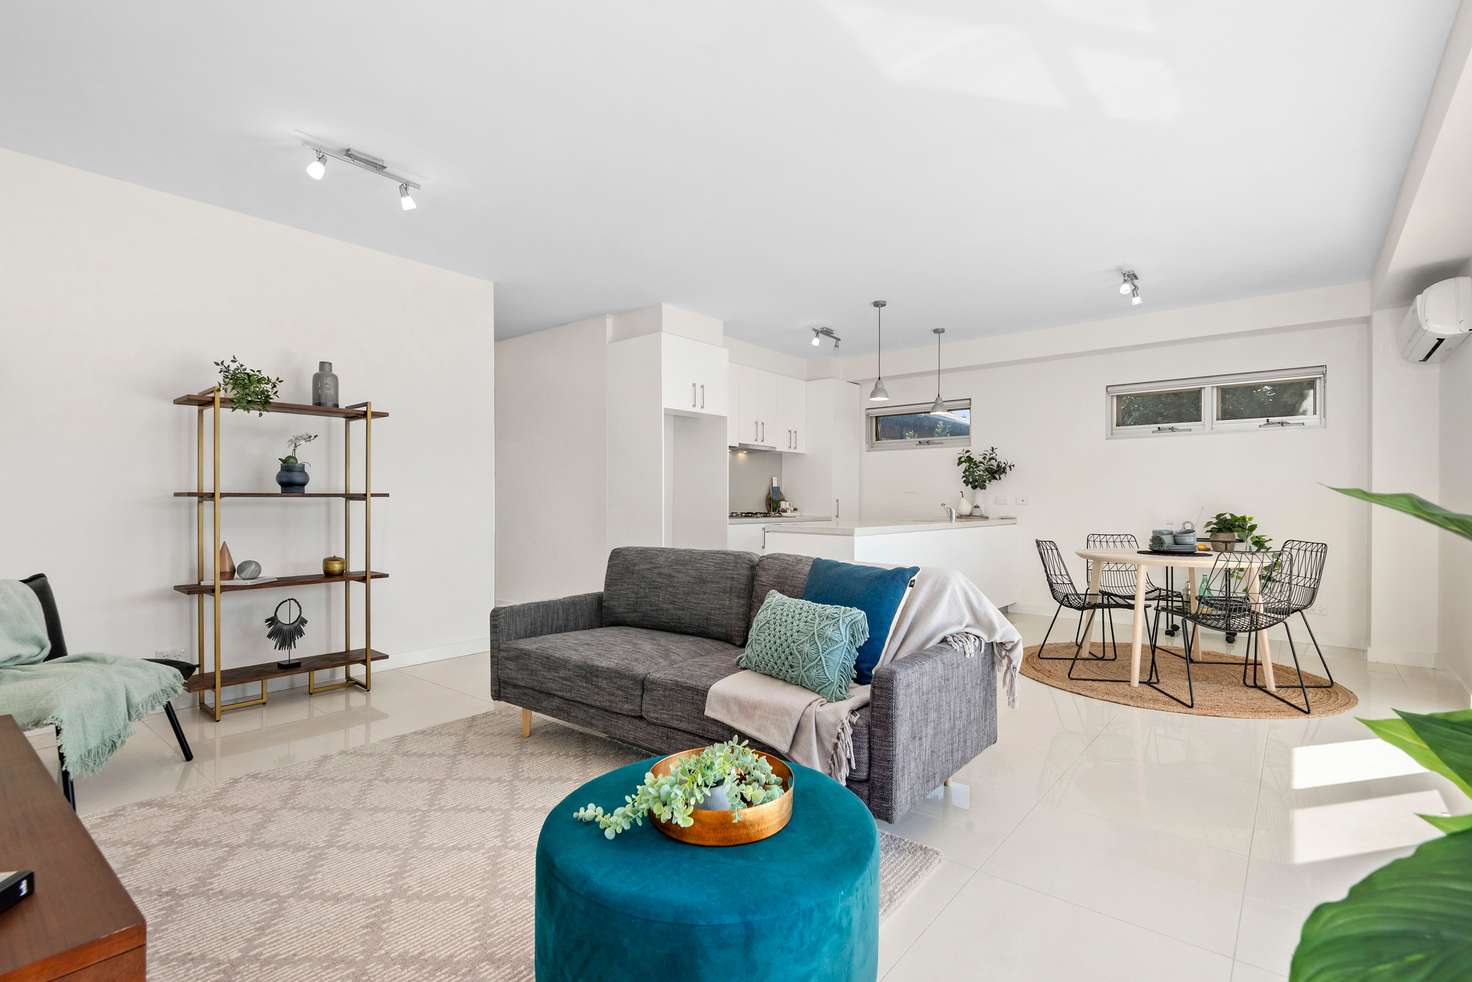 Main view of Homely apartment listing, 11/51-53 Murrumbeena Road, Murrumbeena VIC 3163